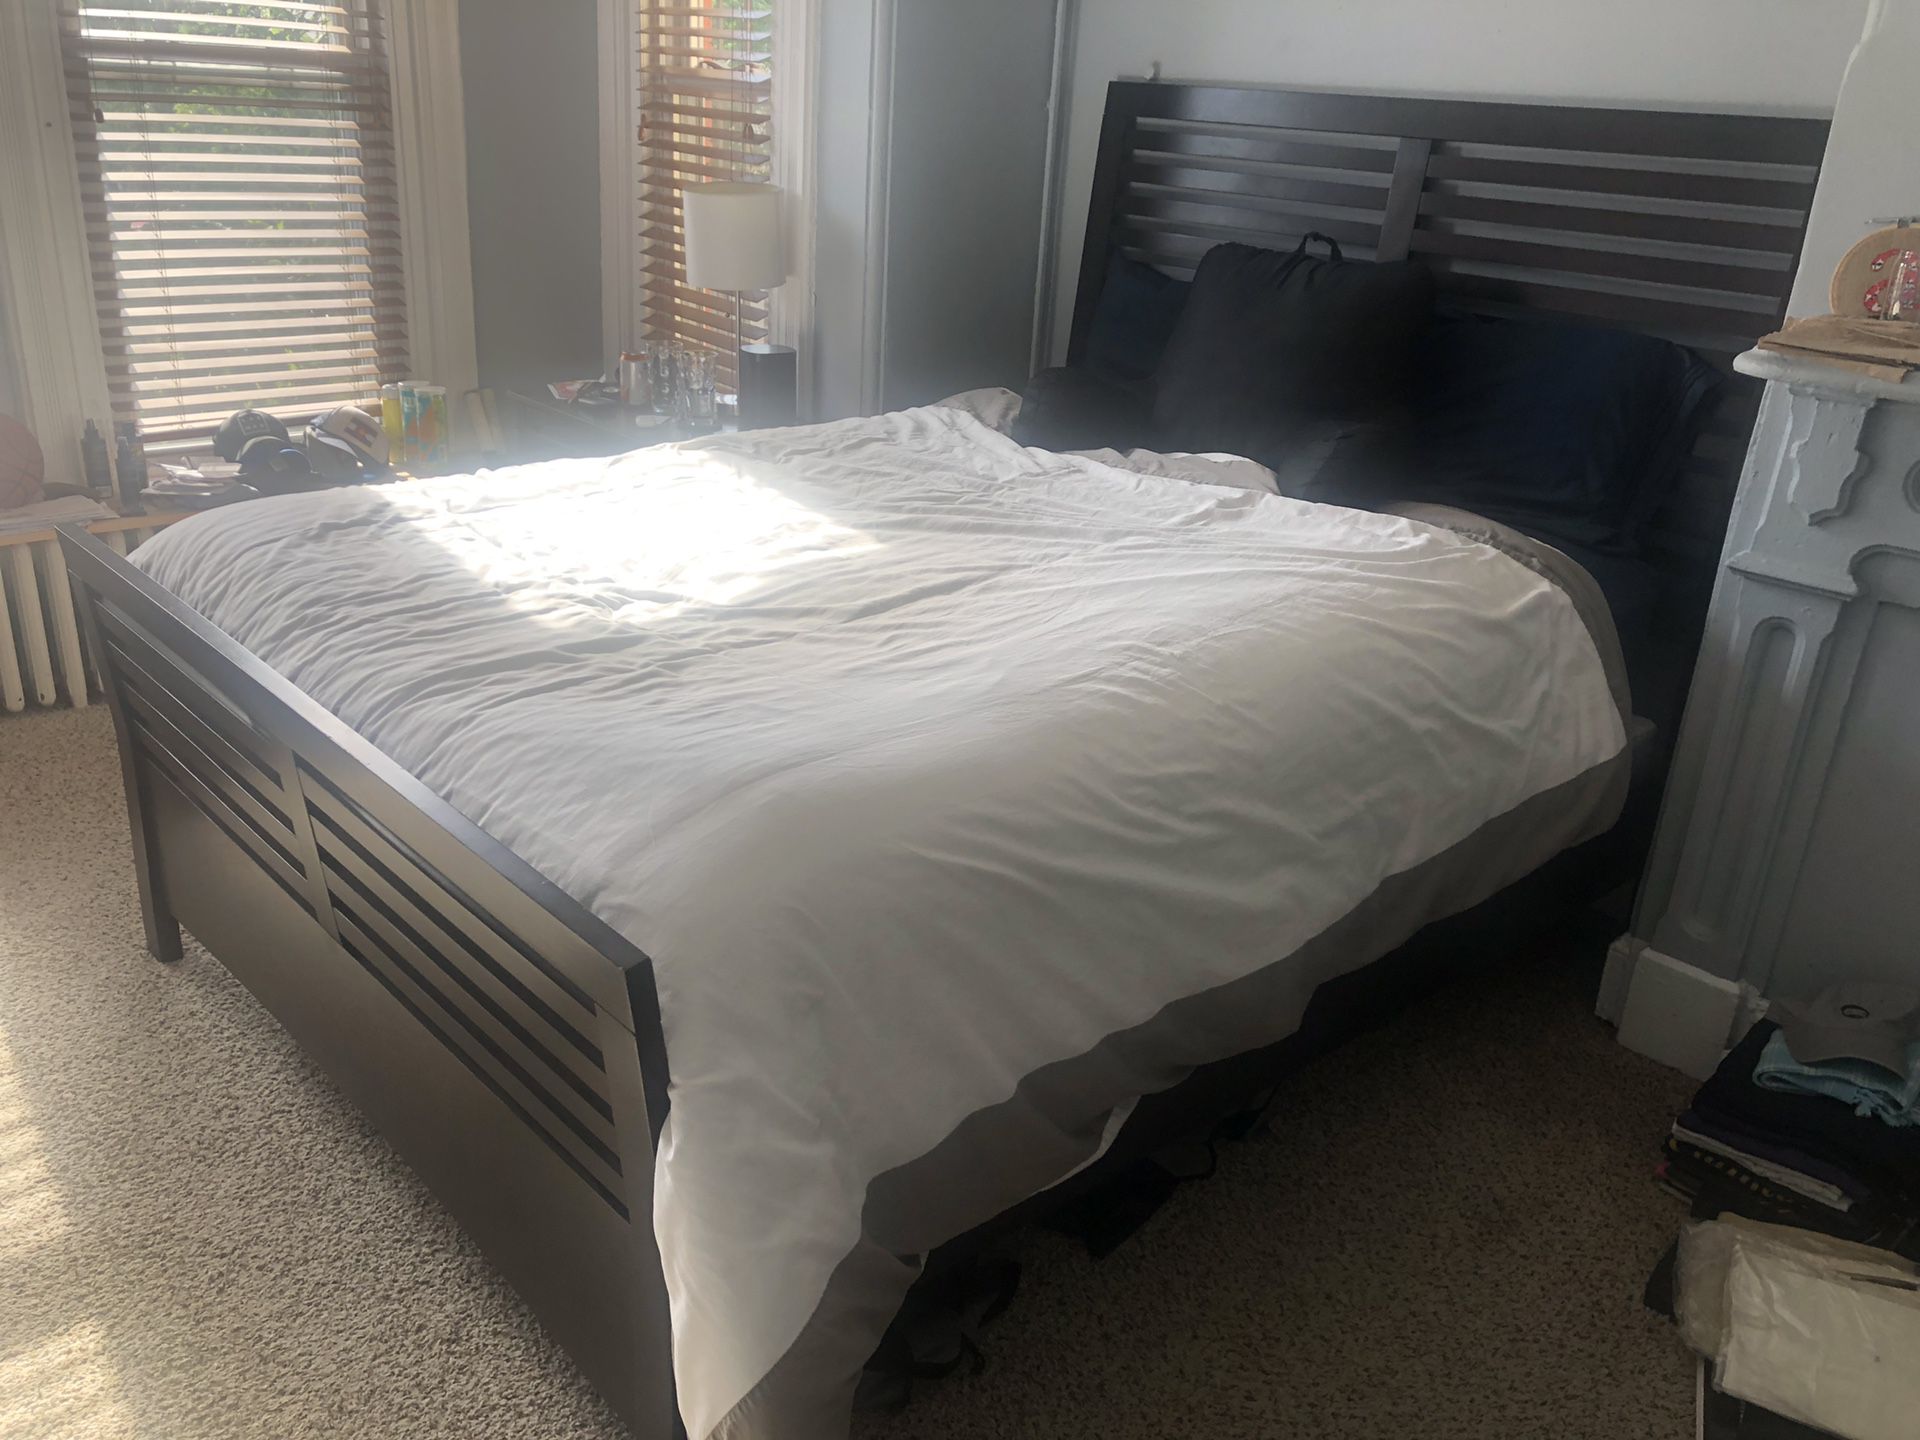 Queen bed frame, box spring, and mattress